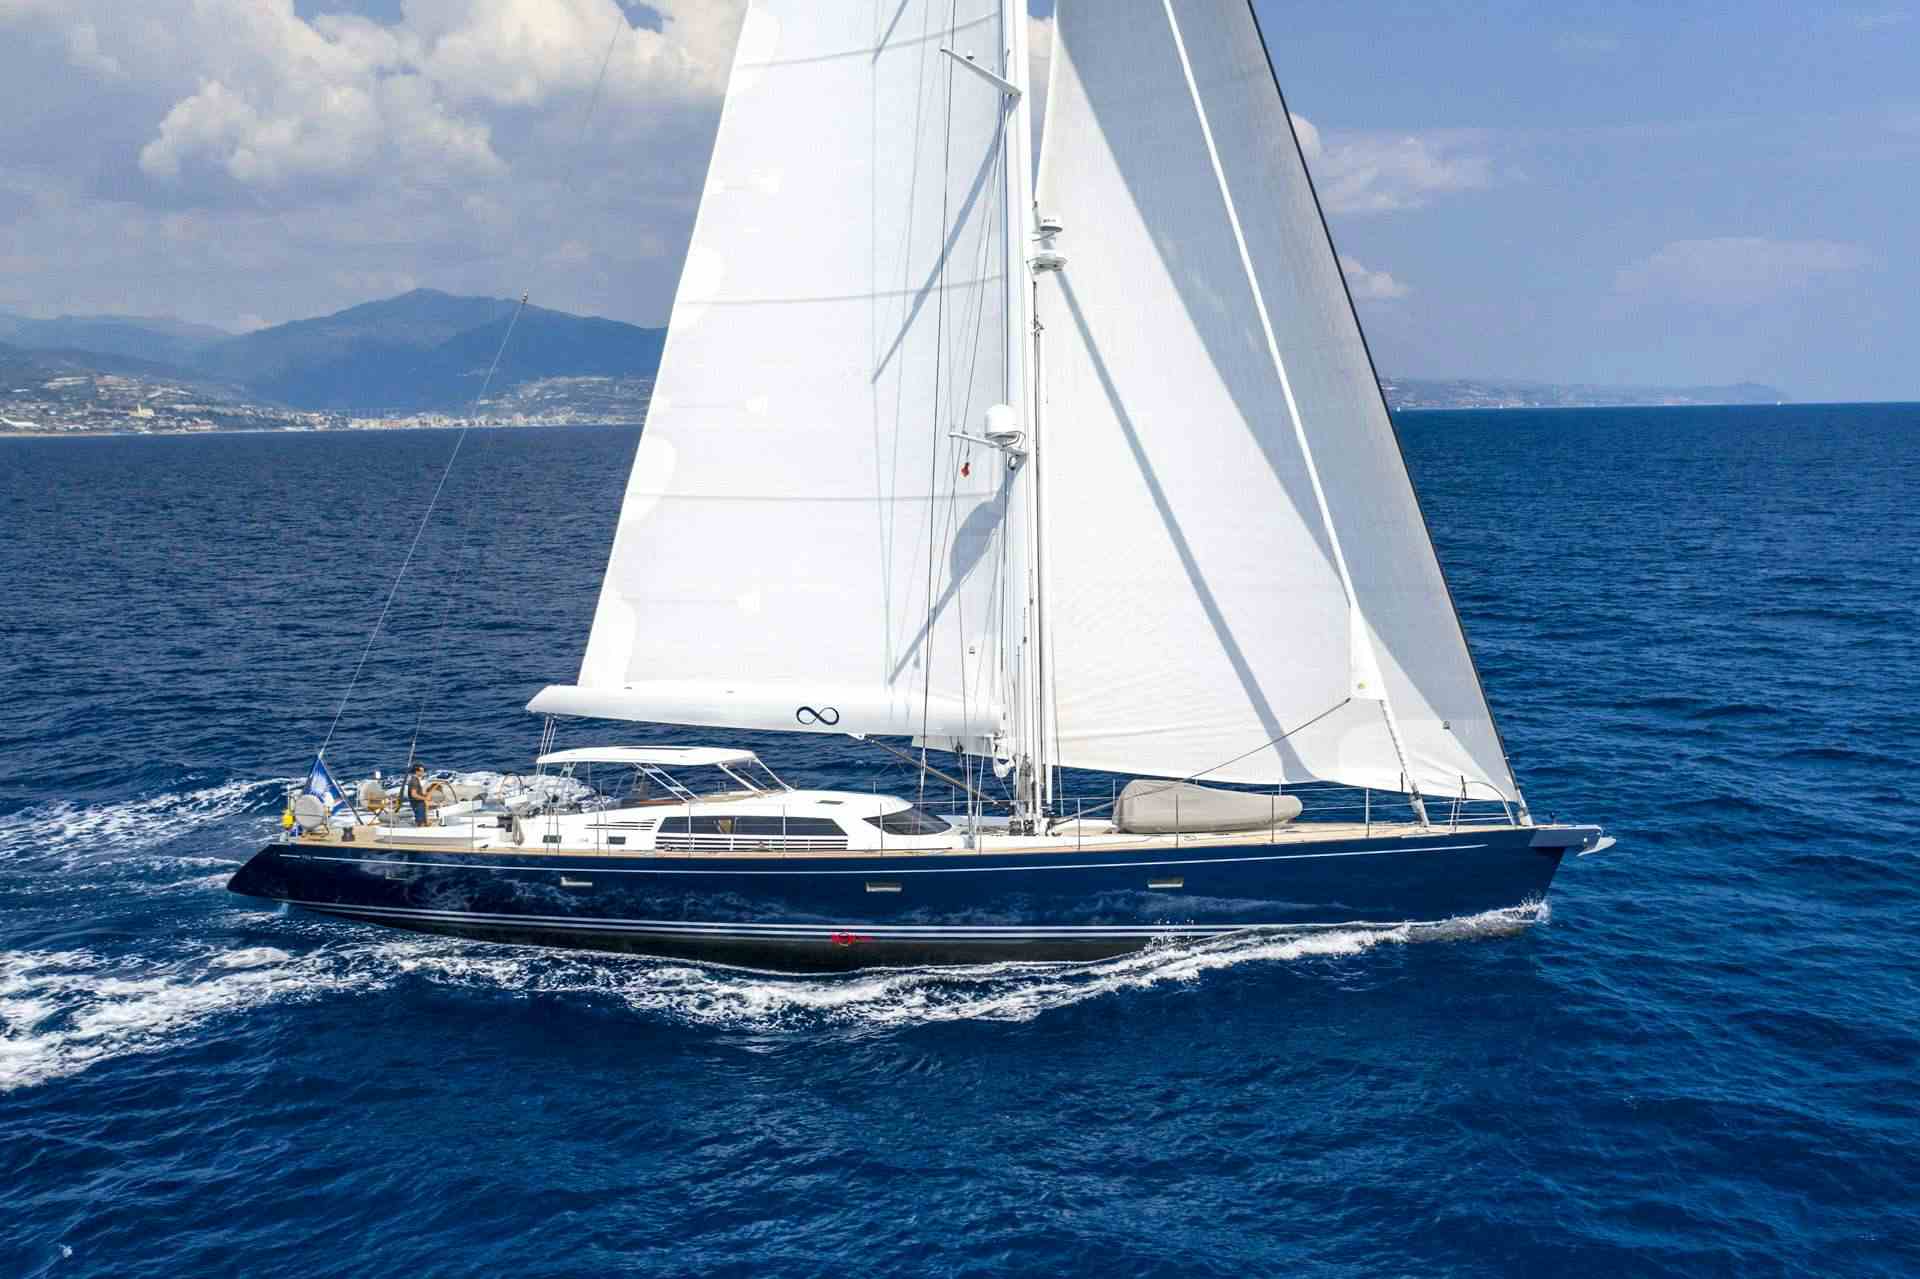 LADY 8 - Sailboat Charter Martinique & Boat hire in W. Med -Naples/Sicily, W. Med -Riviera/Cors/Sard., Caribbean Leewards, Caribbean Windwards, Turkey, W. Med - Spain/Balearics, Caribbean Leewards, Caribbean Windwards 1